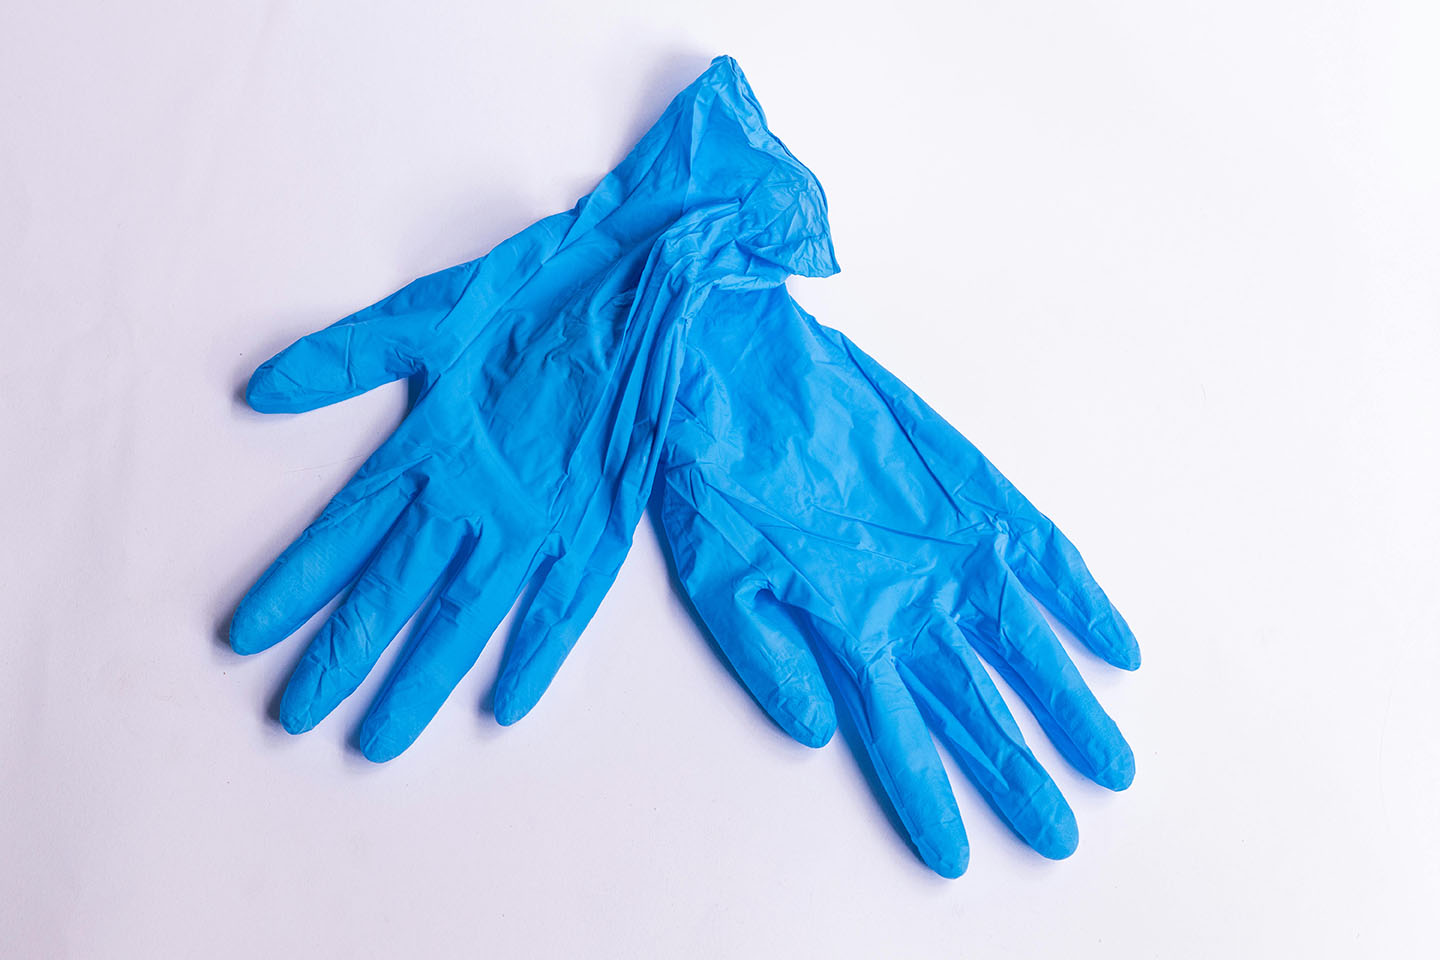 Pair of blue disposable gloves